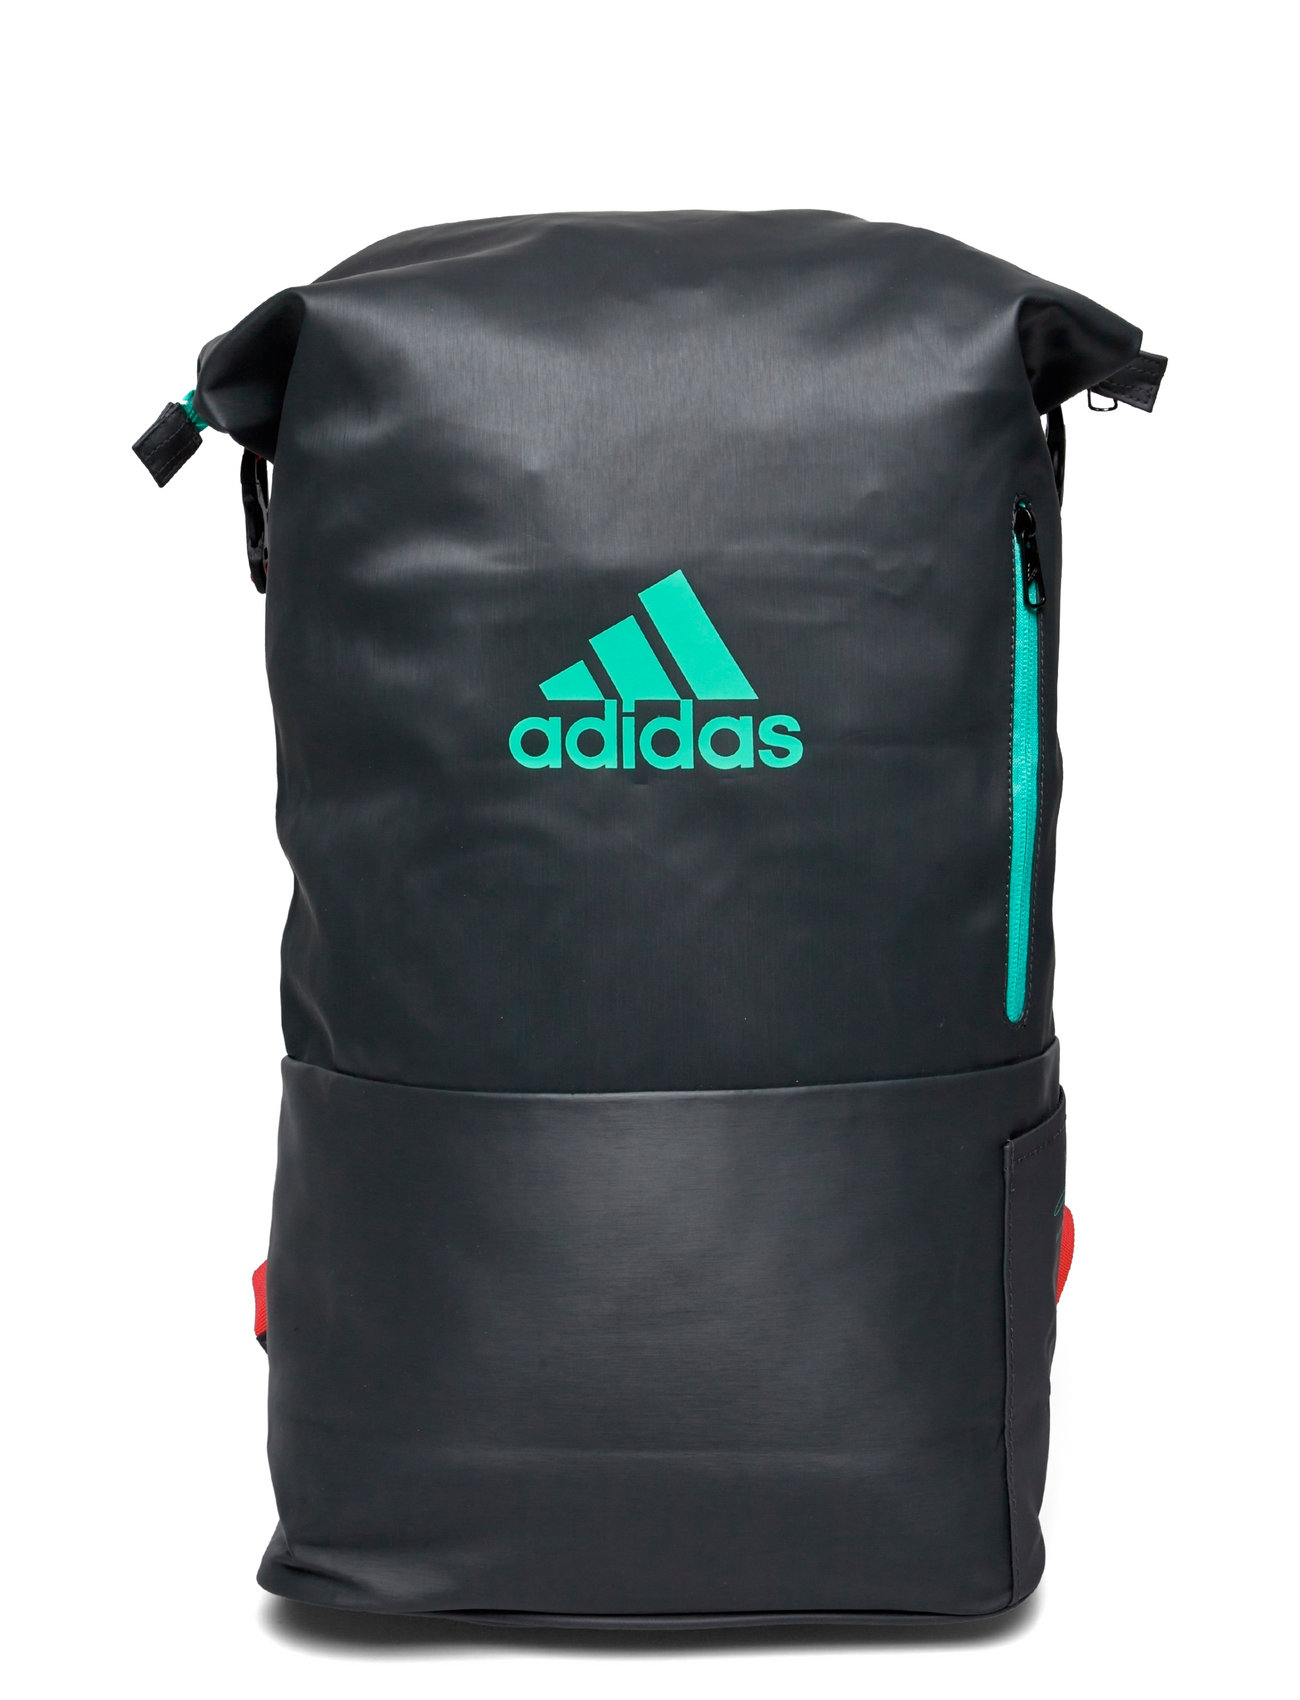 "adidas Performance" "Backpack Multigame Sport Sports Equipment Rackets & Racketsports Bags Black Adidas